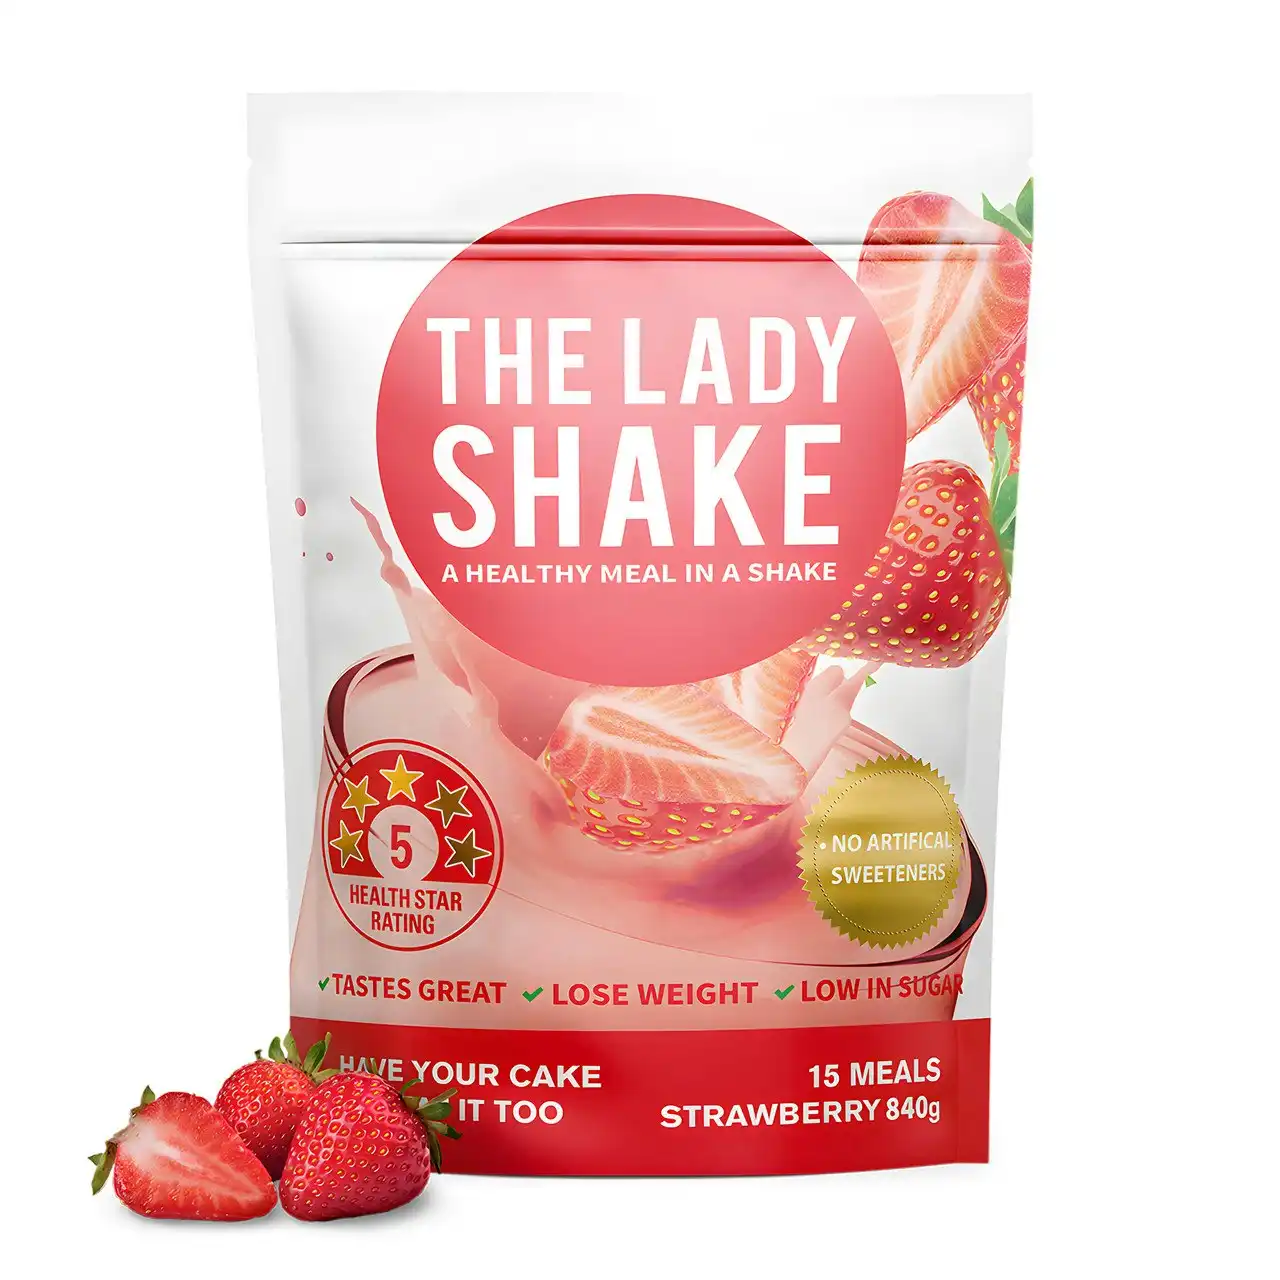 The Lady Shake Meal Replacement Strawberry 840g